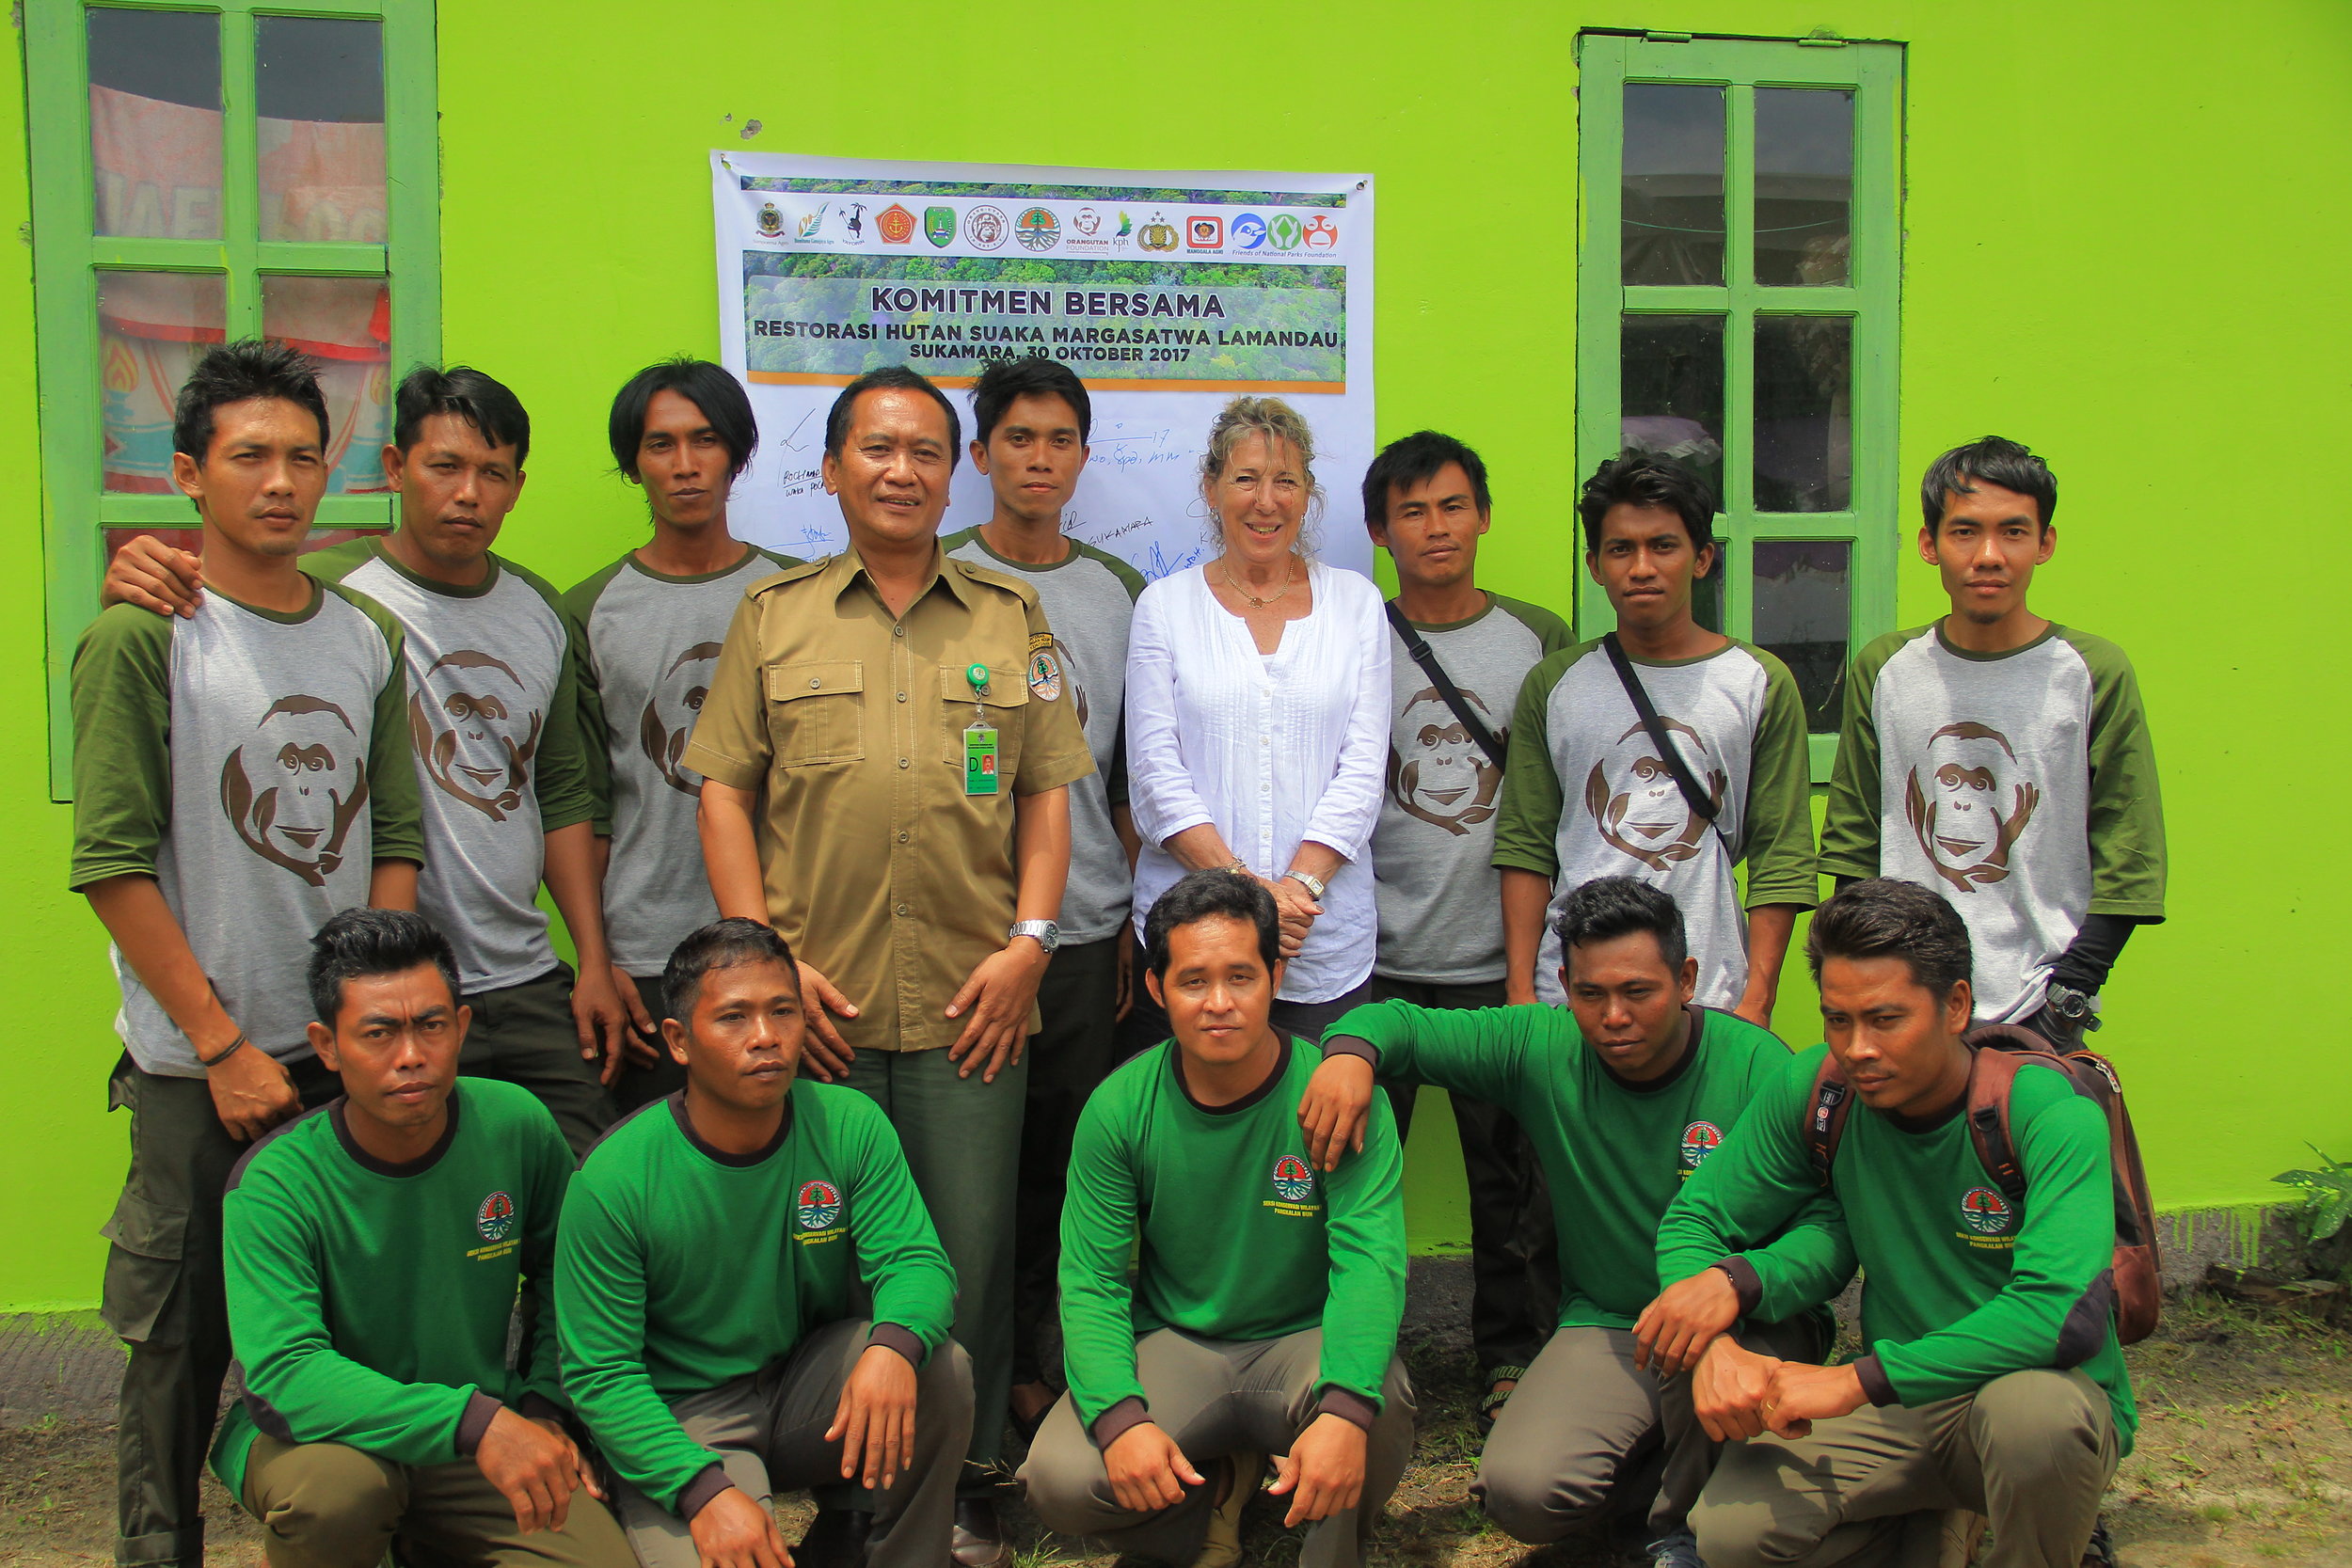 OF Director Ashley Leiman OBE together with BKSDA and Orangutan Foundation guard post staff. Image© Orangutan Foundation.